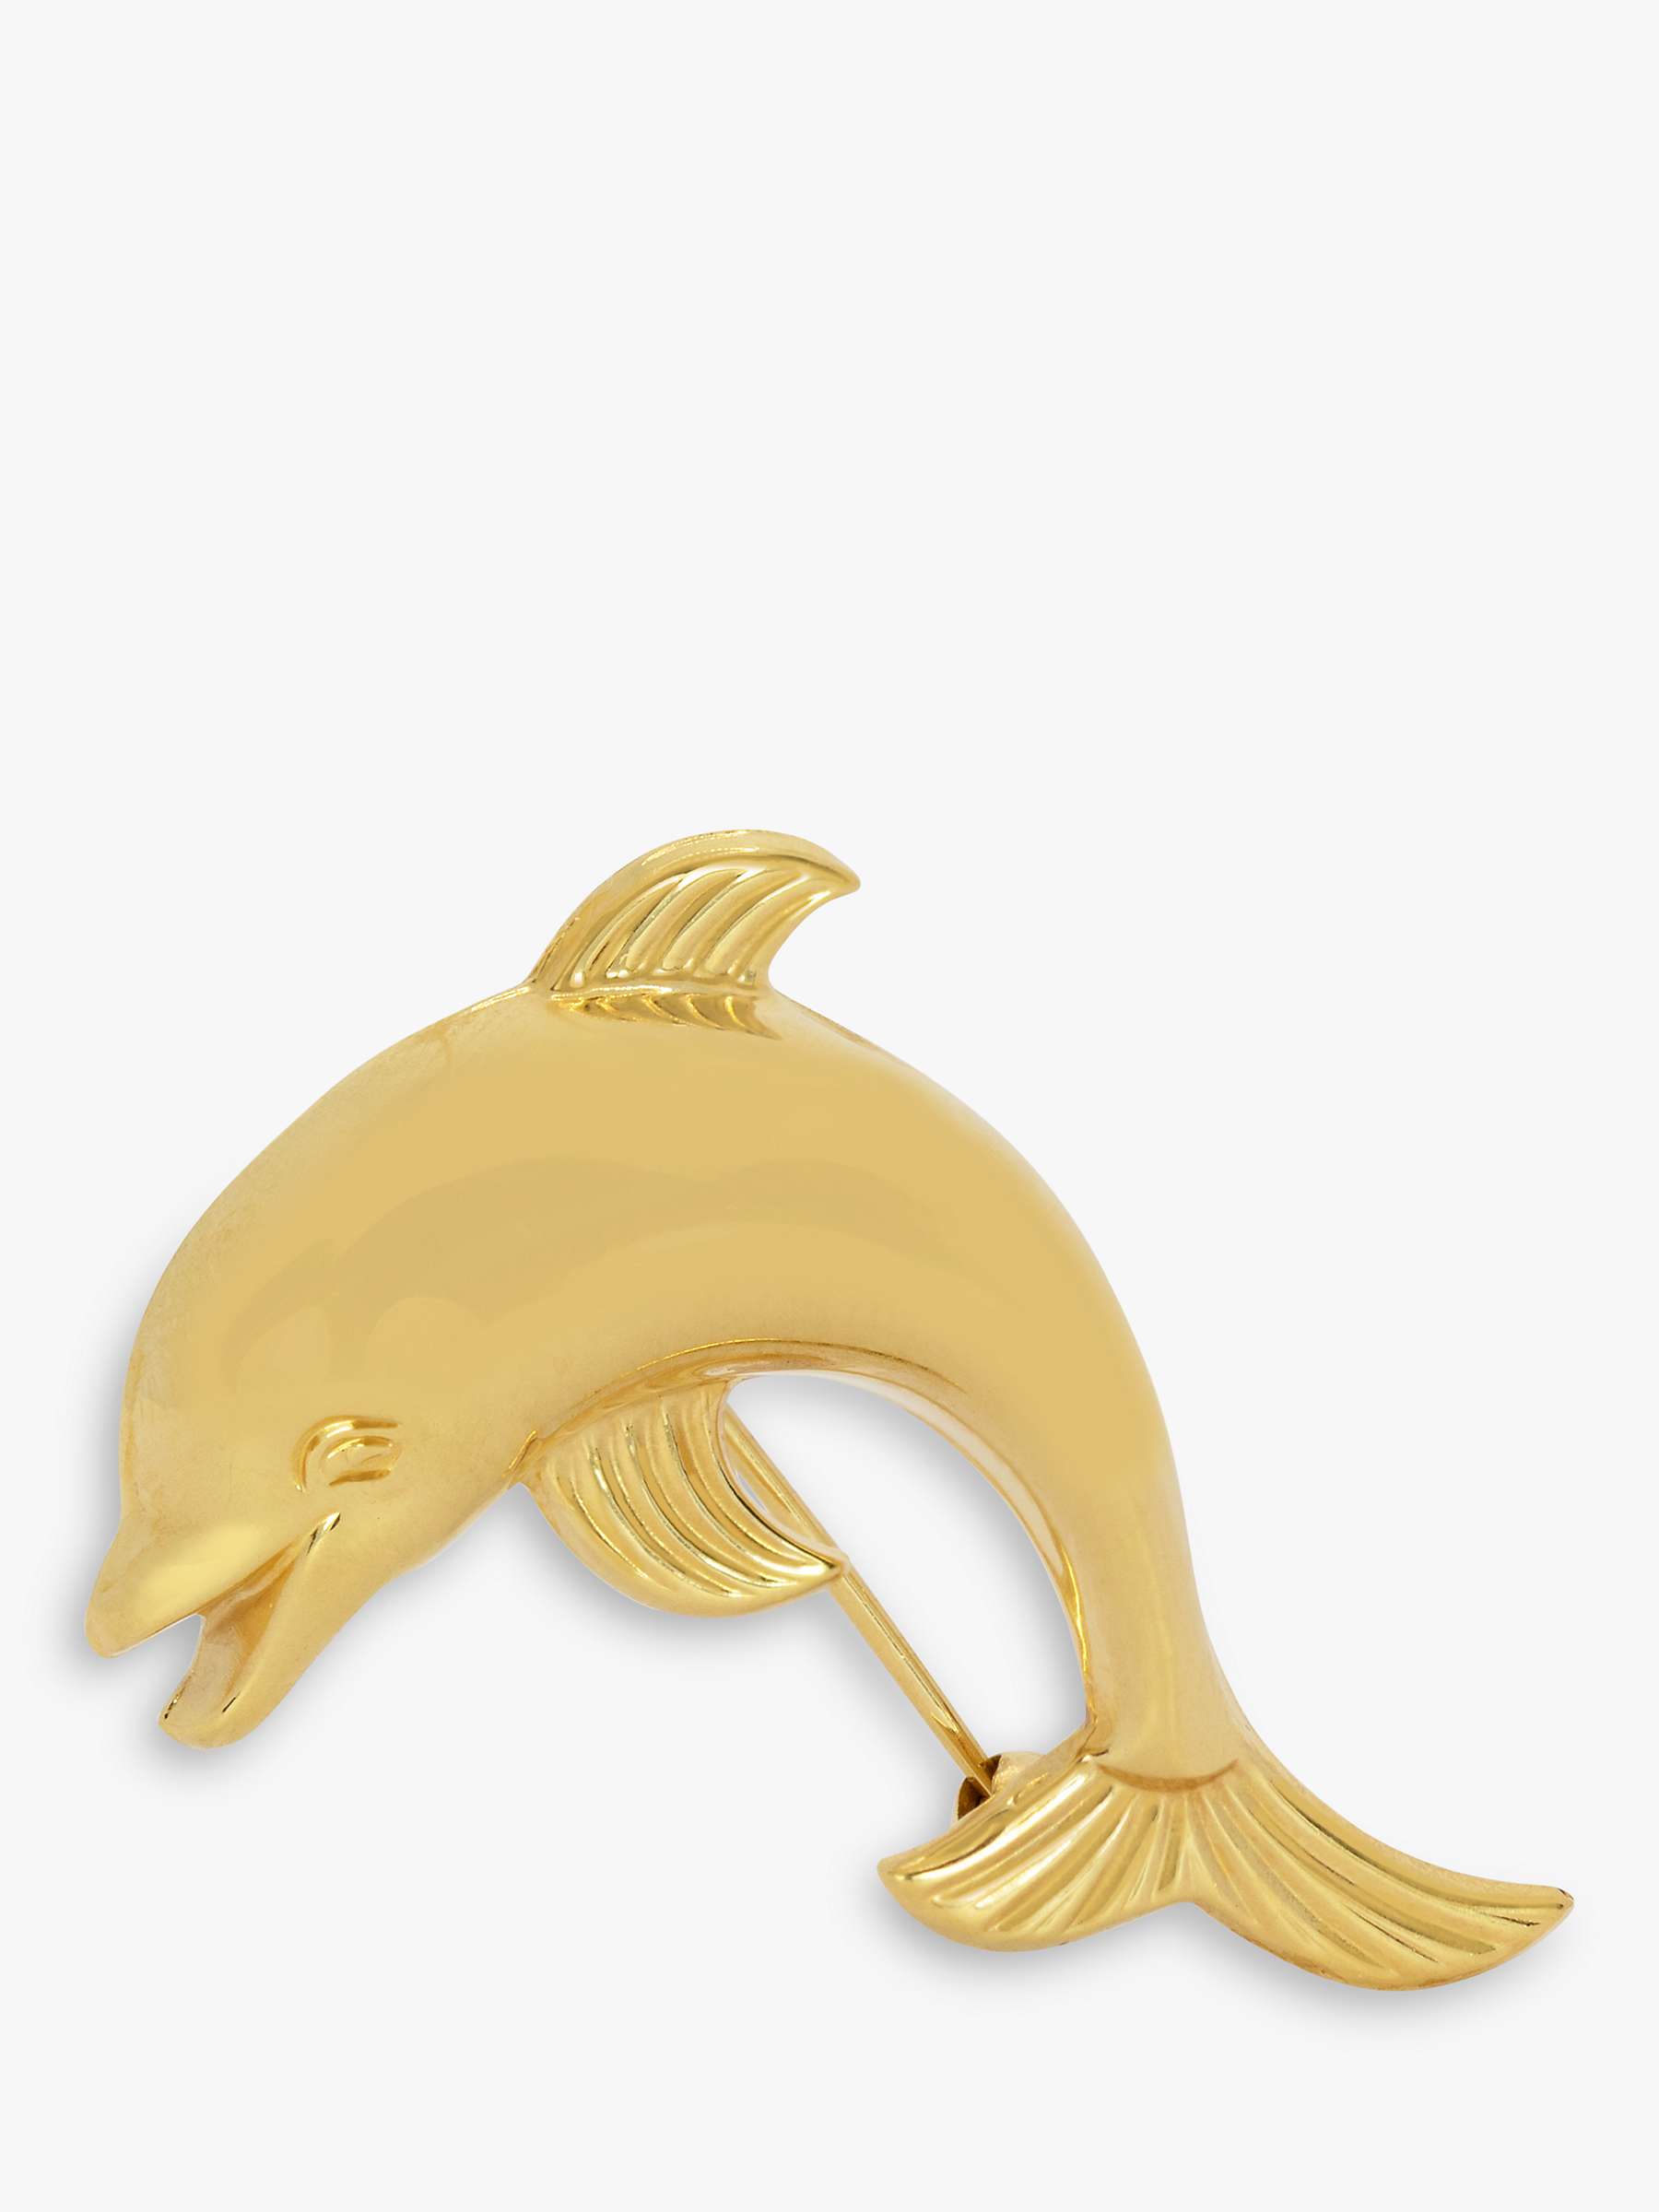 Buy Kojis Second Hand Polished 14ct Yellow Gold Dolphin Brooch Online at johnlewis.com